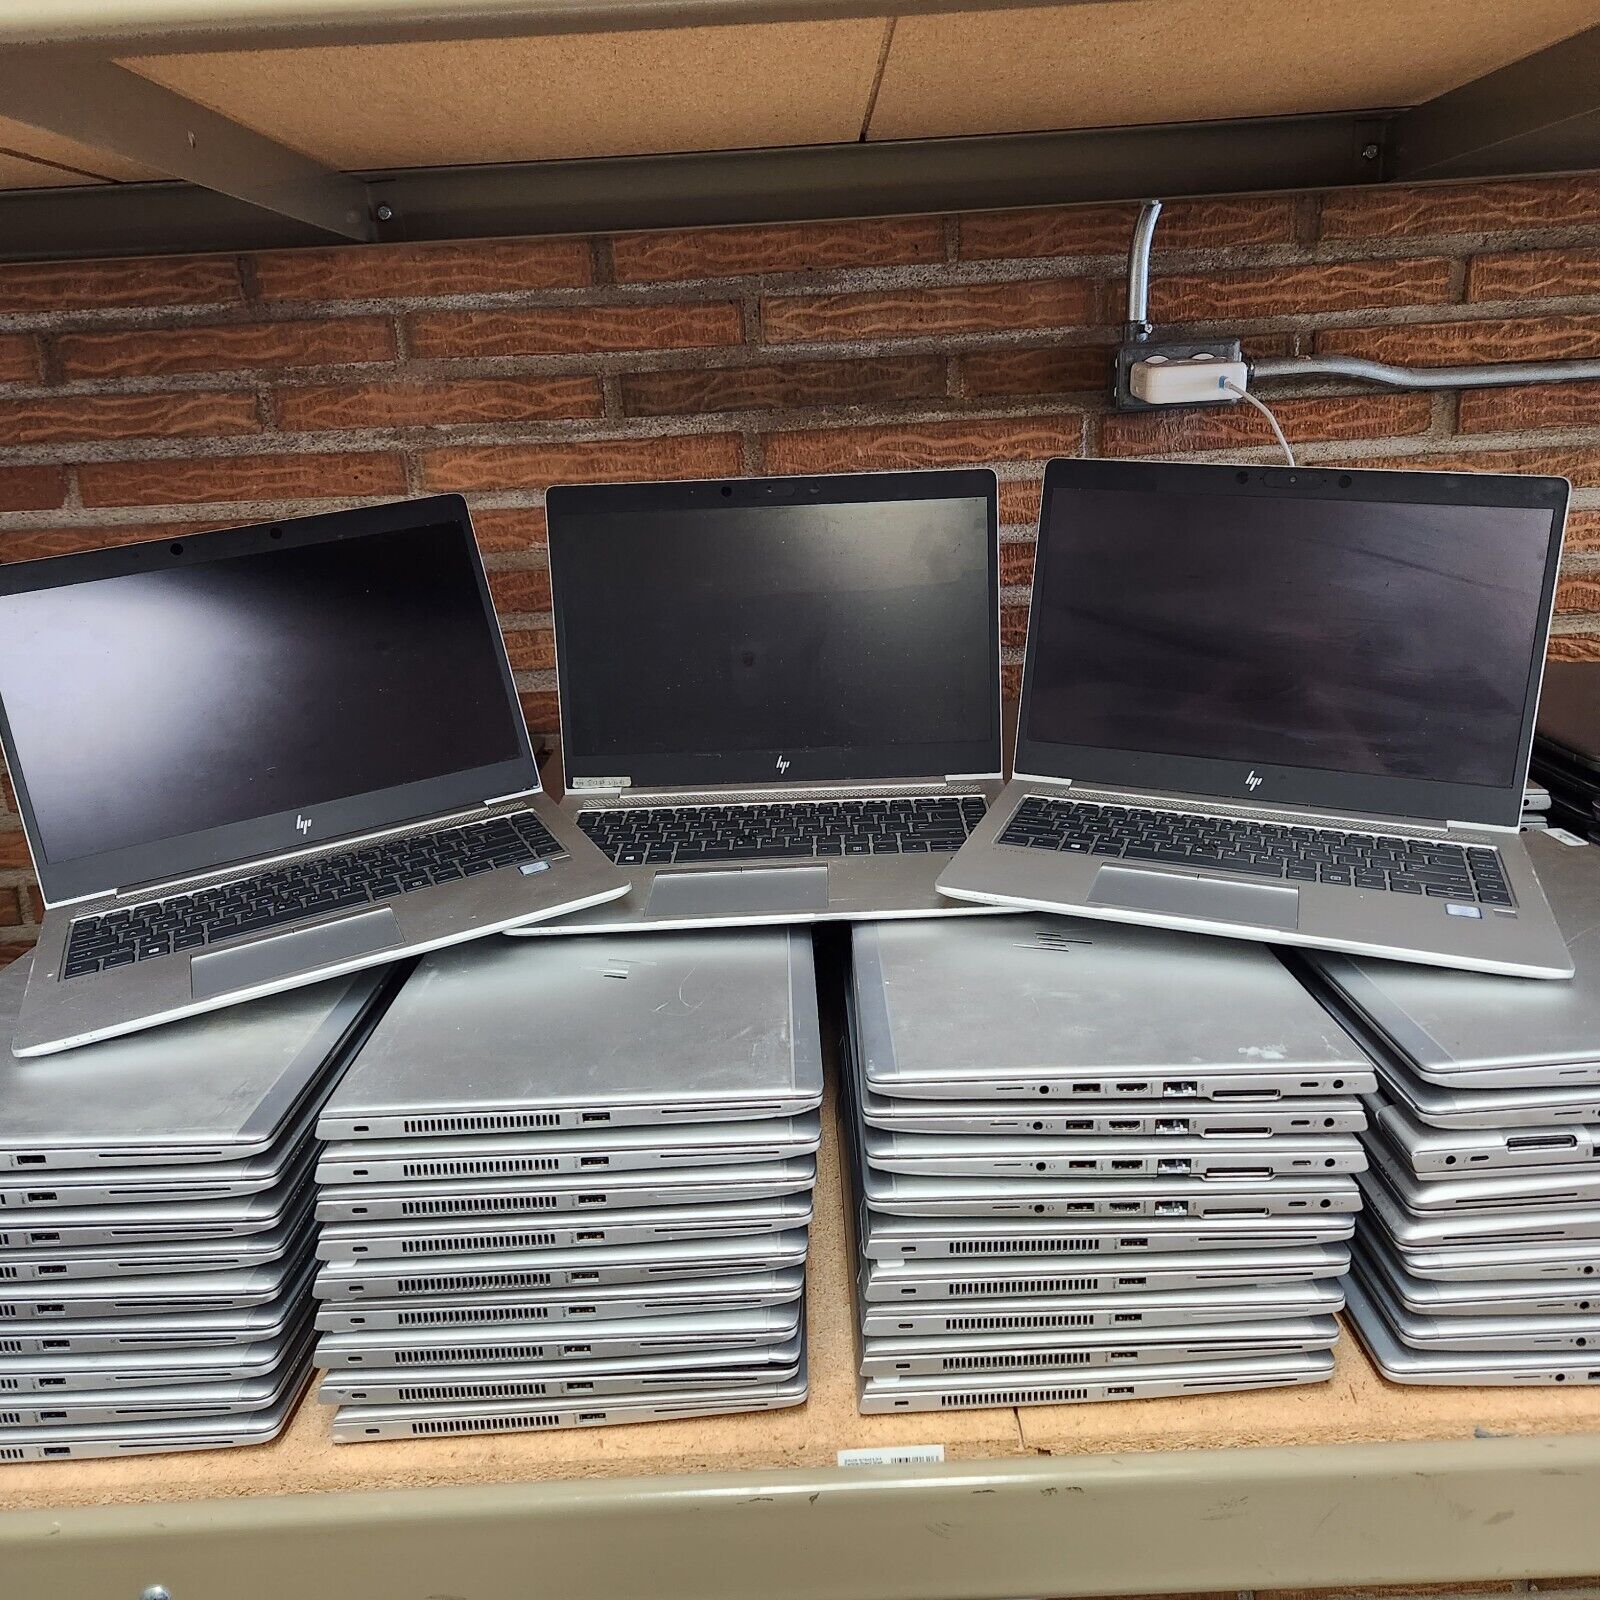 LOT OF 79 Laptops ELITEBOOK 840 G6 i5, i7 8th Gen *UNTESTED For Parts or Repair*